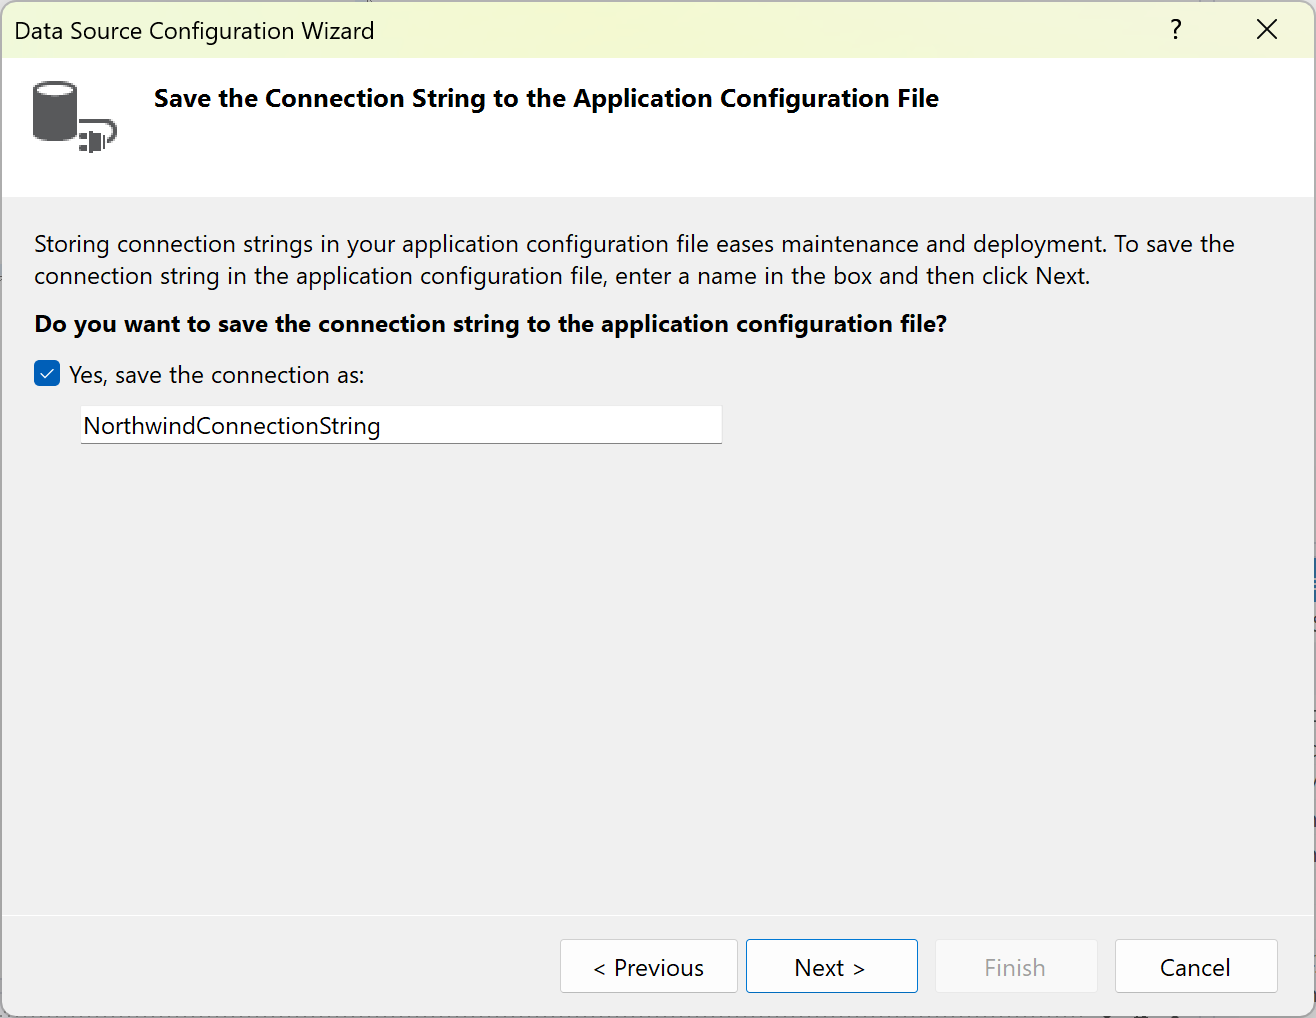 Screenshot showing option to save connection string to the application configuration file.